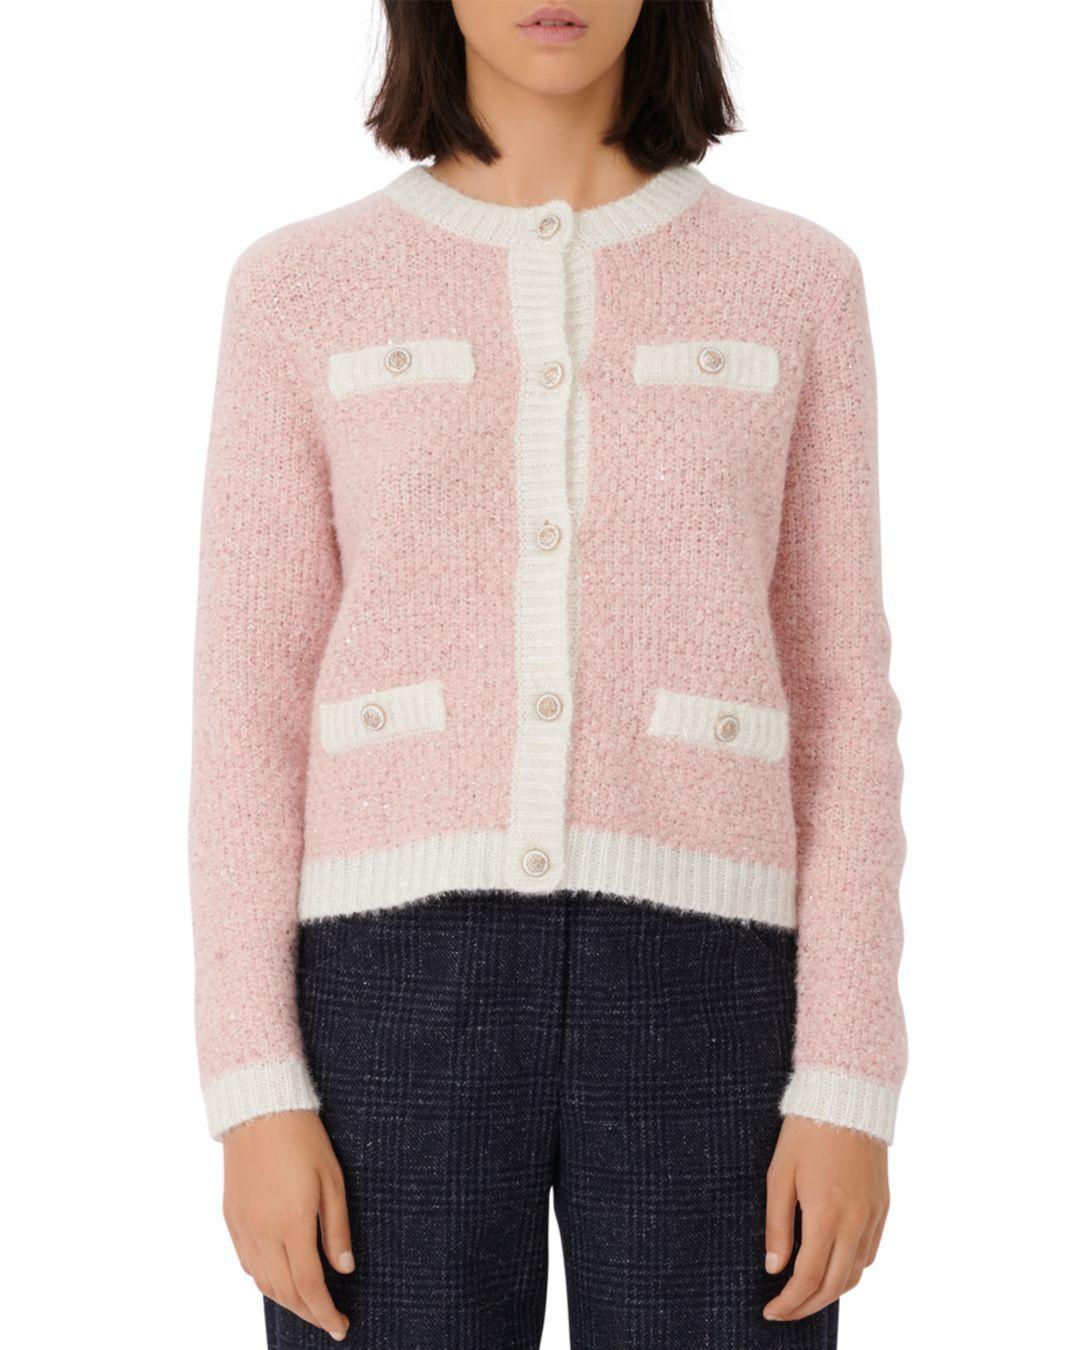 Maje Morning Lurex Sequined Cardigan in Pink | Lyst